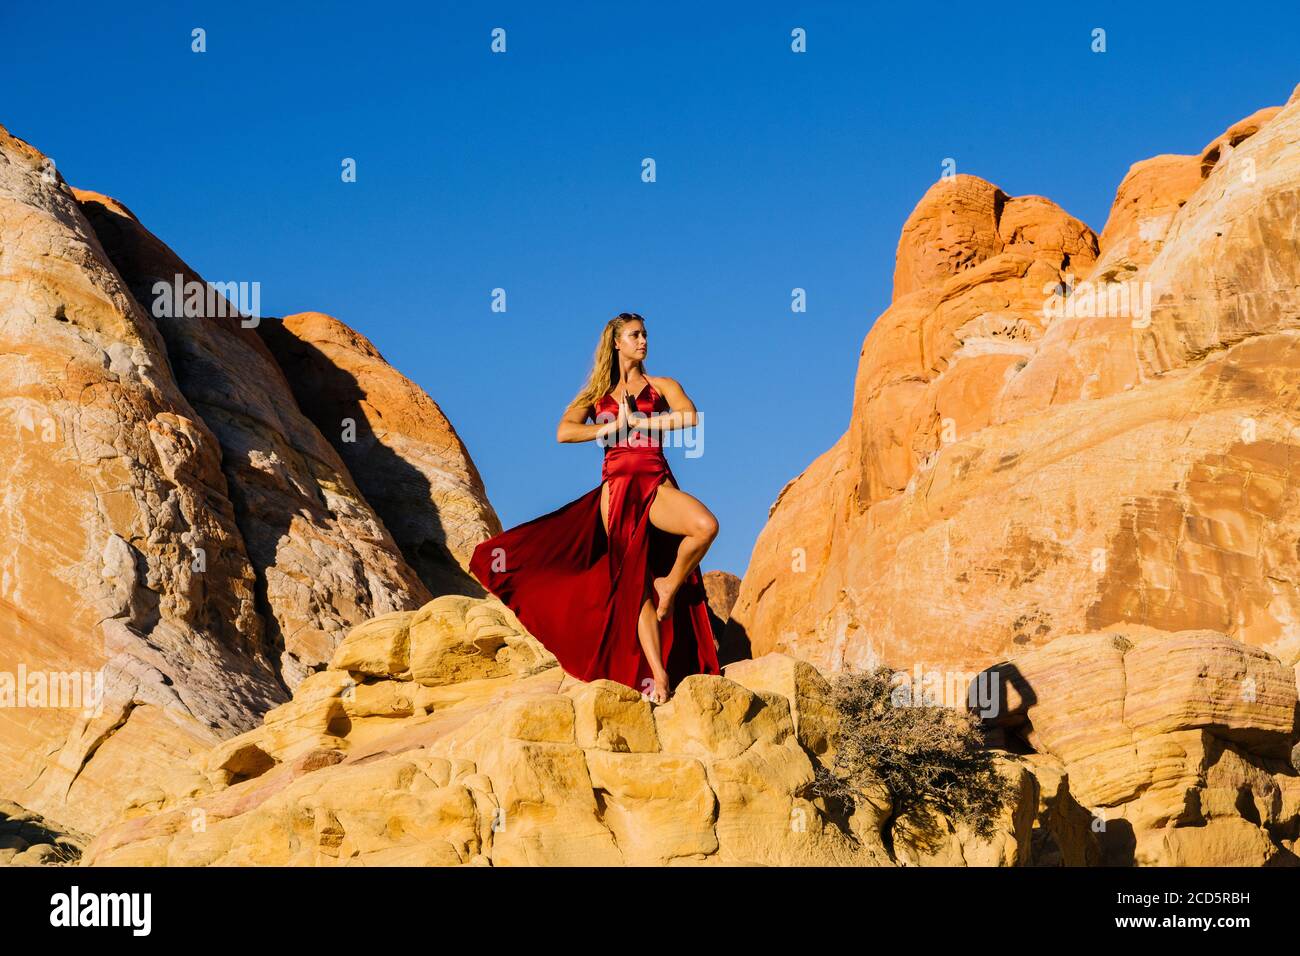 Woman on rock formation, Aztec Sandstone,  State Park, Mohave Desert, Overton, Nevada, USA Stock Photo